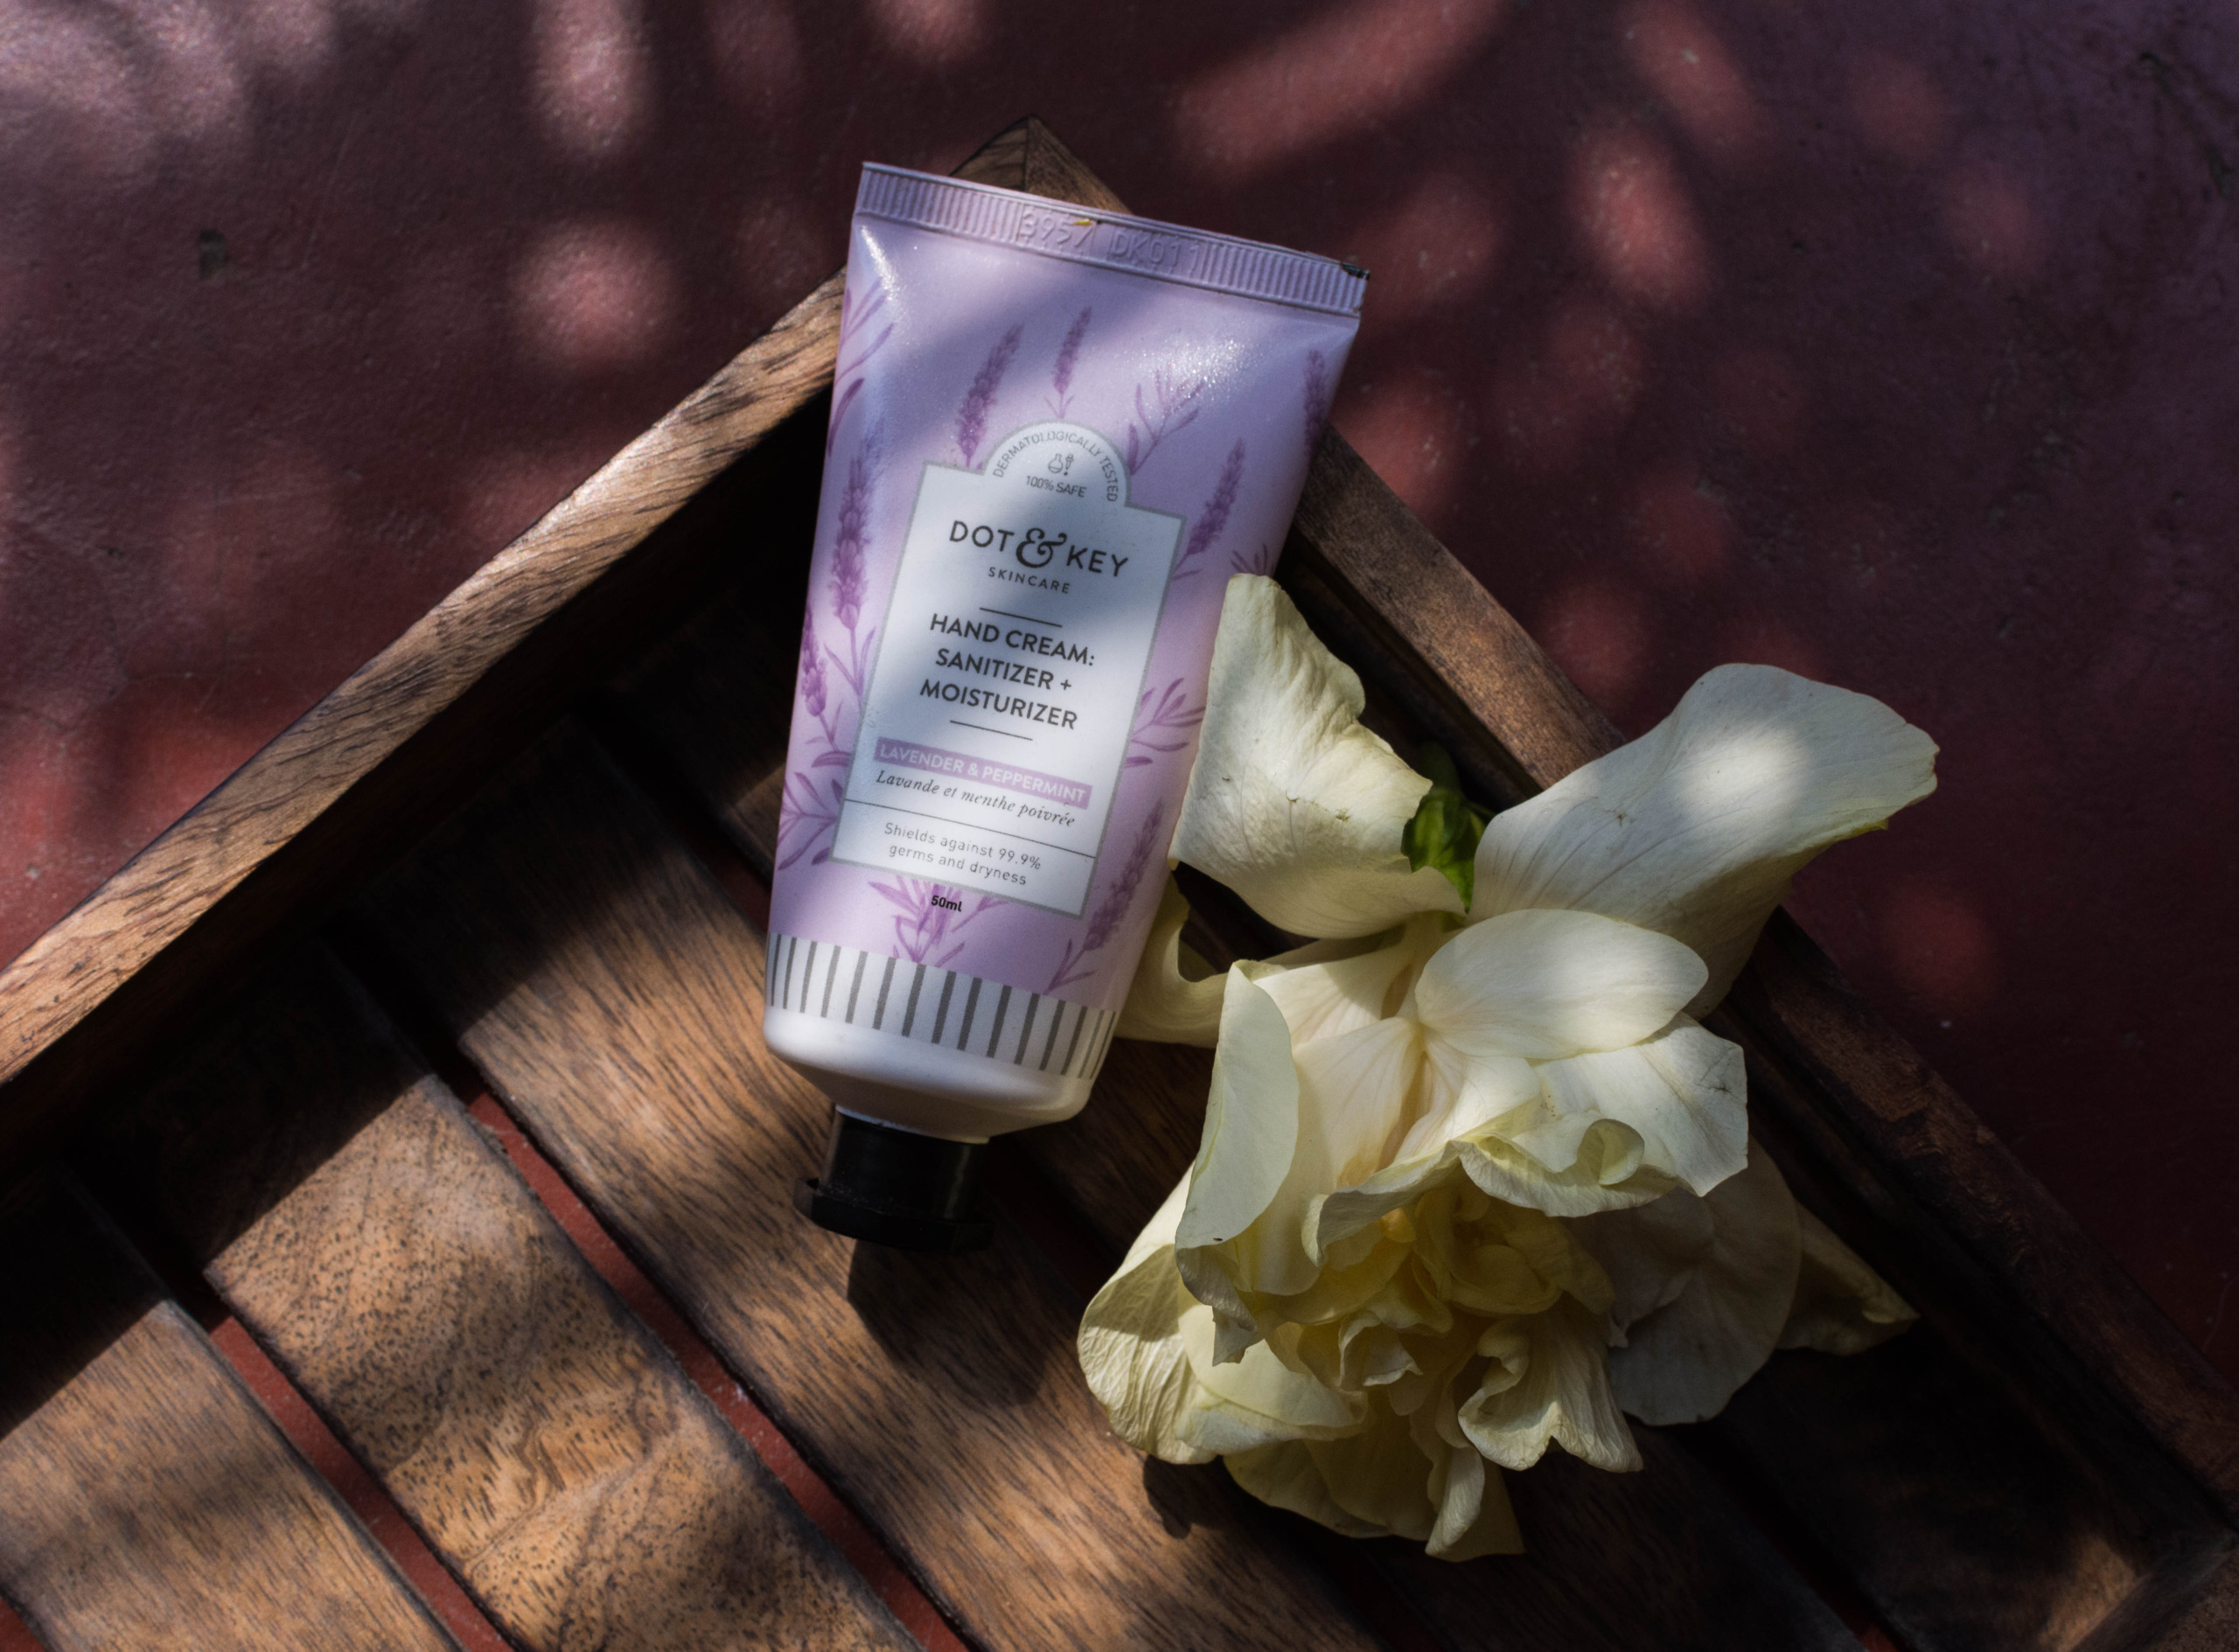 Dot & Key Hand cream and Sanitizer- Lavender Review | Cherry On Top